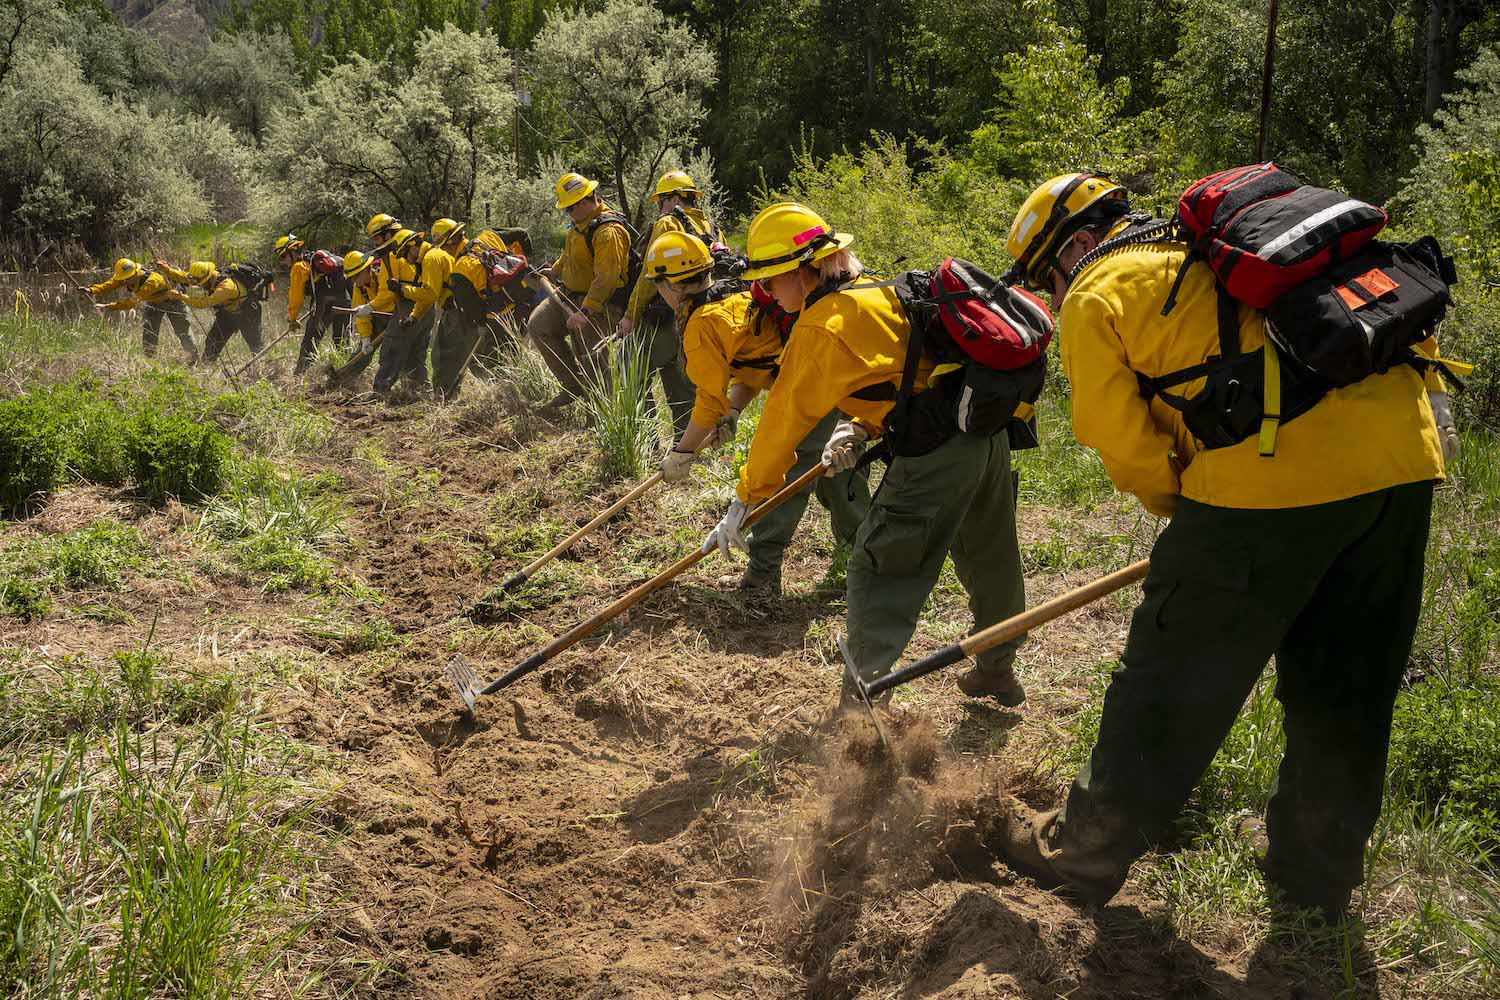 Volunteer firefighters practice with hand tools during a wildfire training course on May 8, 2021 in Brewster, Washington.